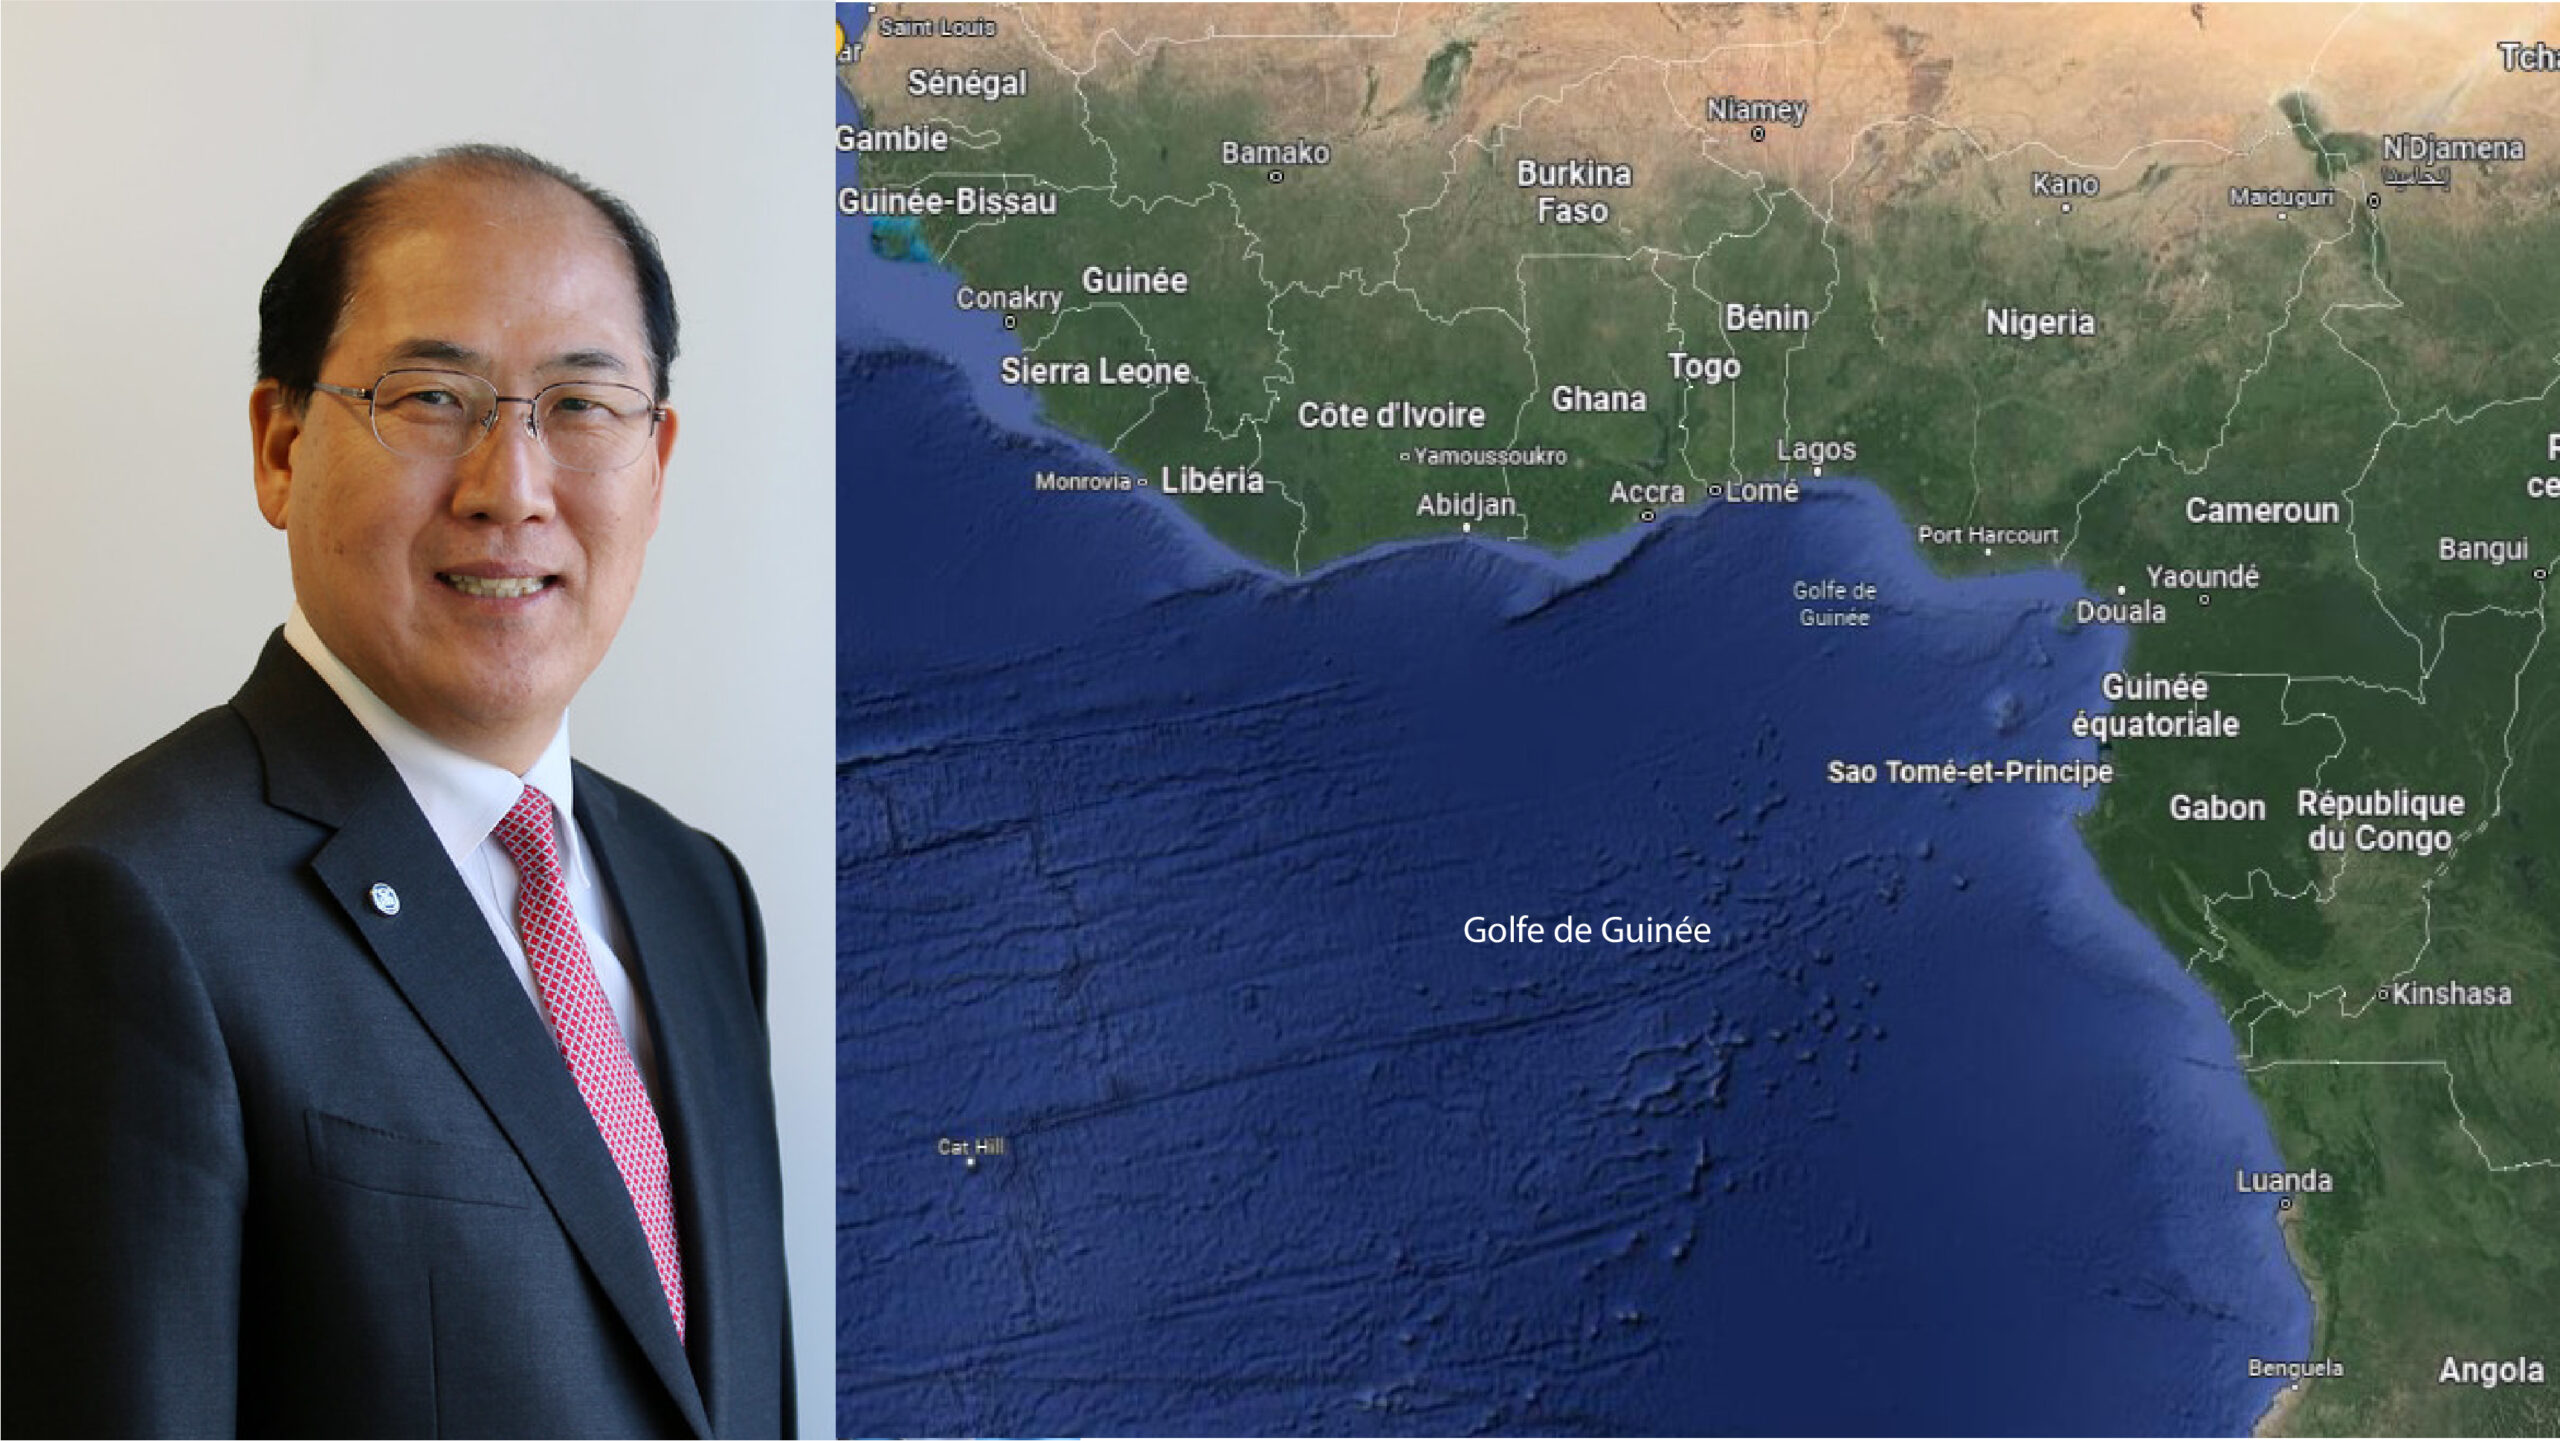 IMO Secretary General concerned about recent incidents of maritime piracy in the Gulf of Guinea